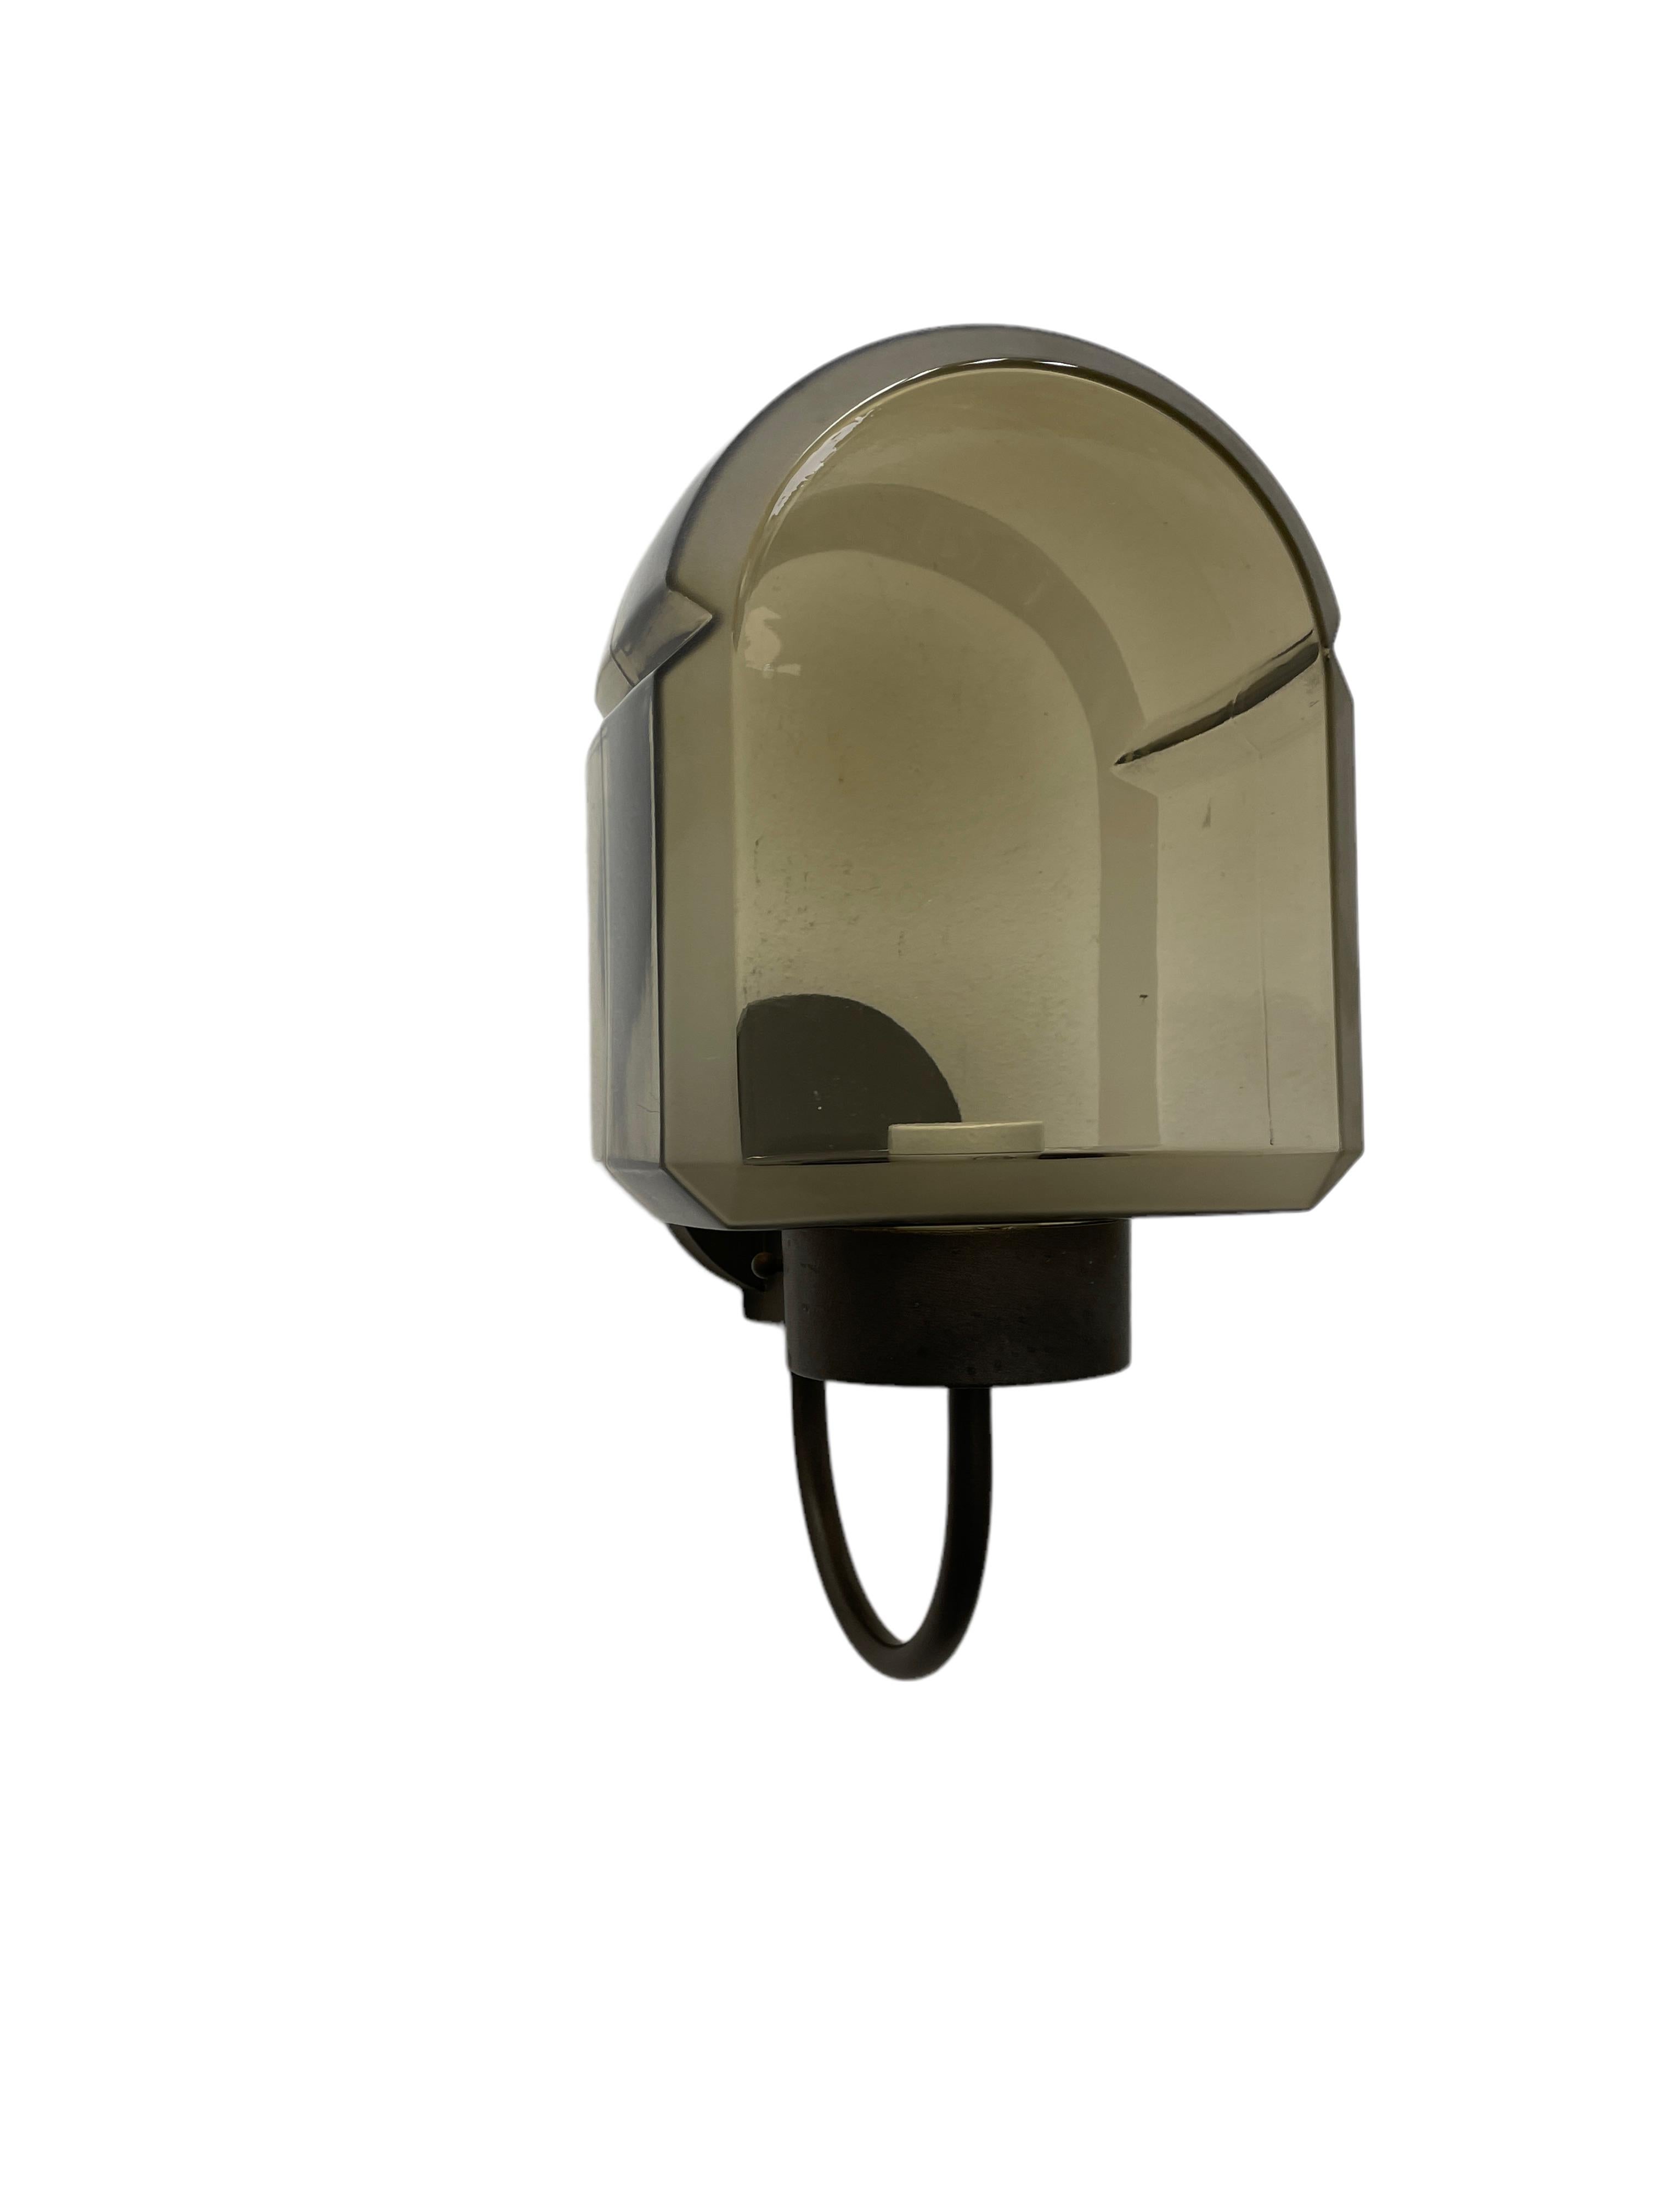 A beautiful outdoor sconce wall light made in the 1980s by a German Manufactory, in very good original condition. The fixture requires one European E27 / 110 Volt Edison bulb, up to 75 watts. Will make a nice addition to you patio, yard or pool area.